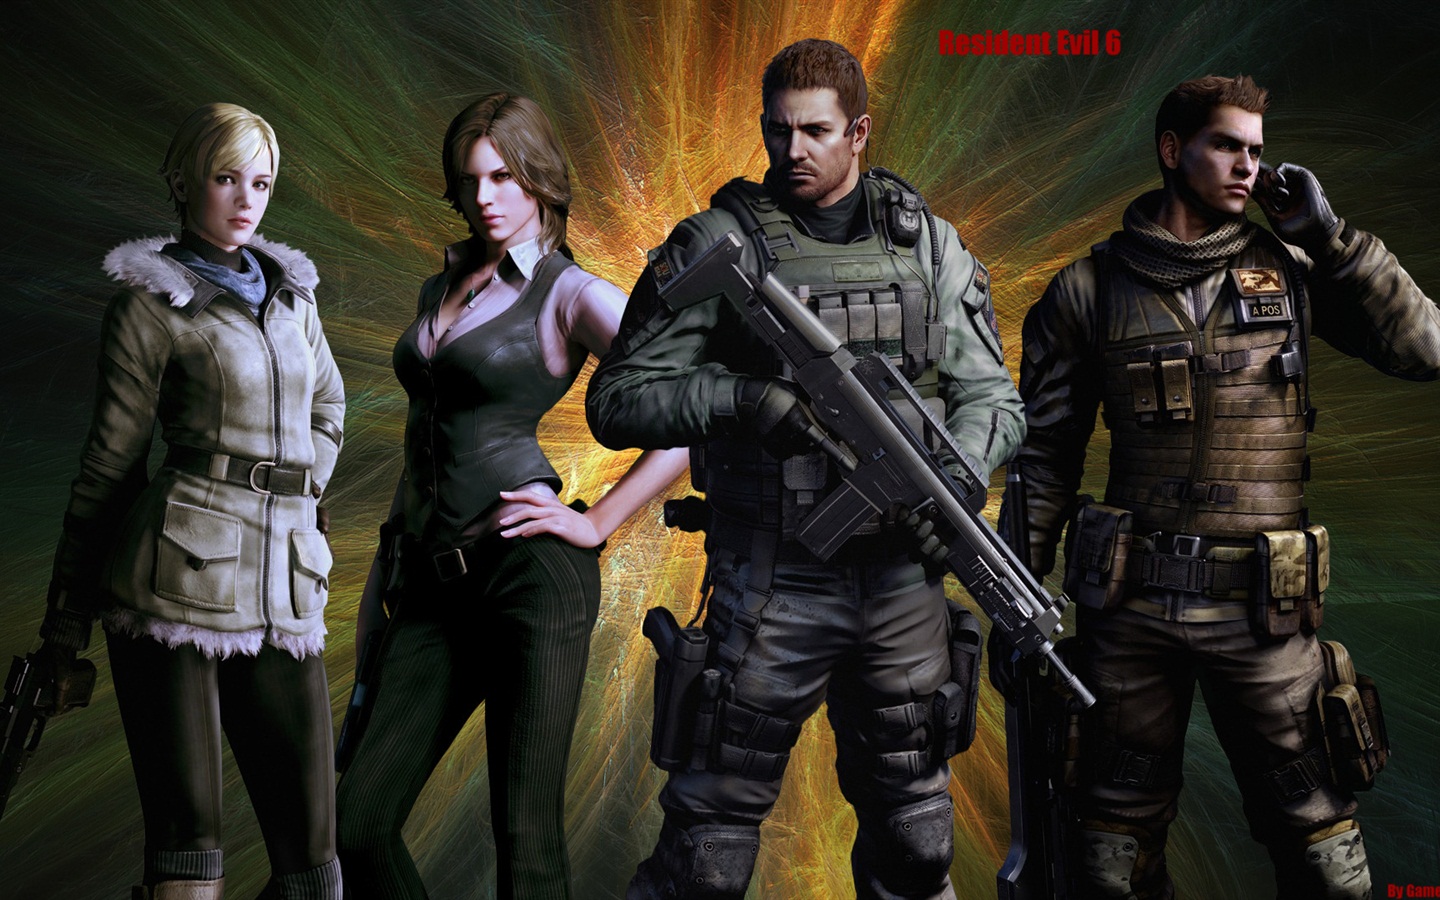 Resident Evil 6 HD game wallpapers #4 - 1440x900